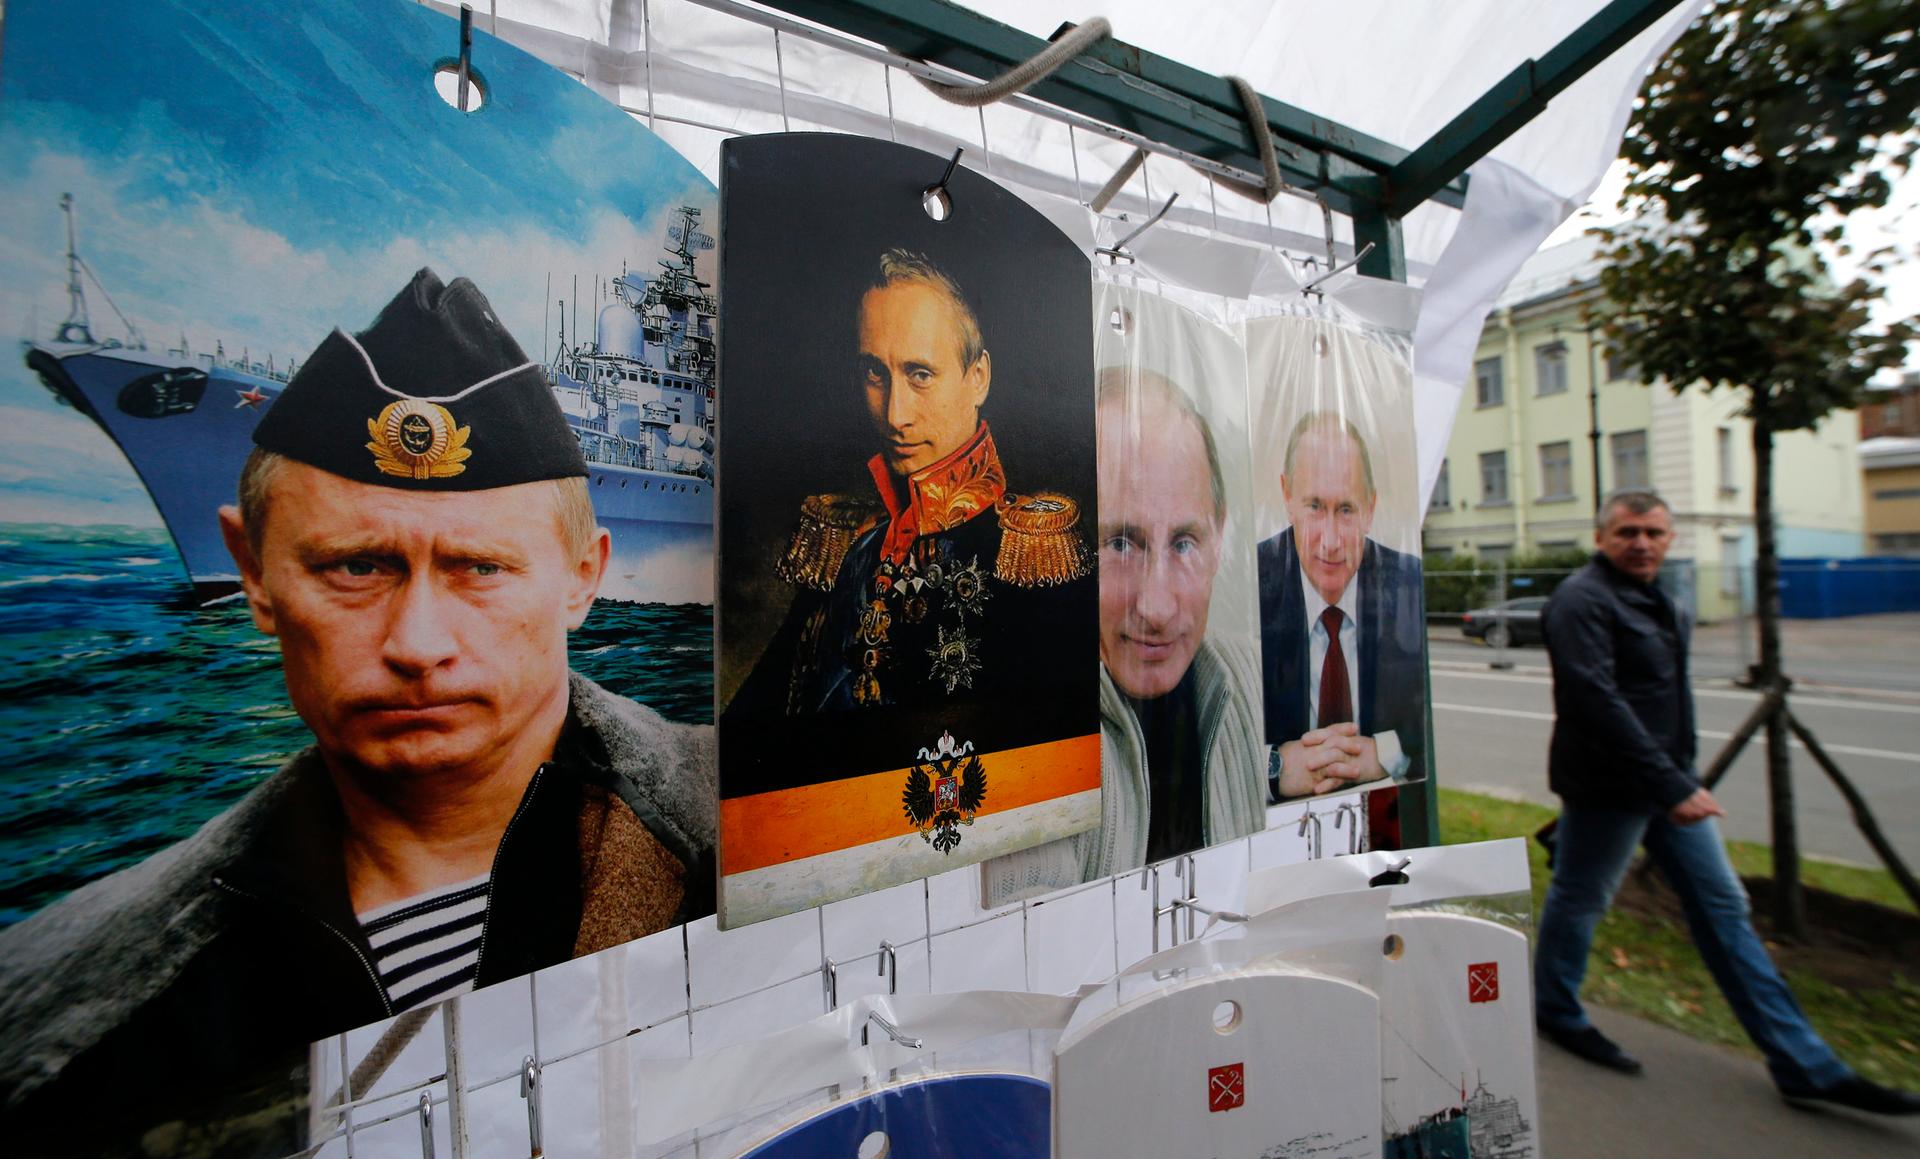 A man walks past cutting boards that have been painted with images of Russia's President Vladimir Putin at a street store in the center of St. Petersburg on August 31, 2014.